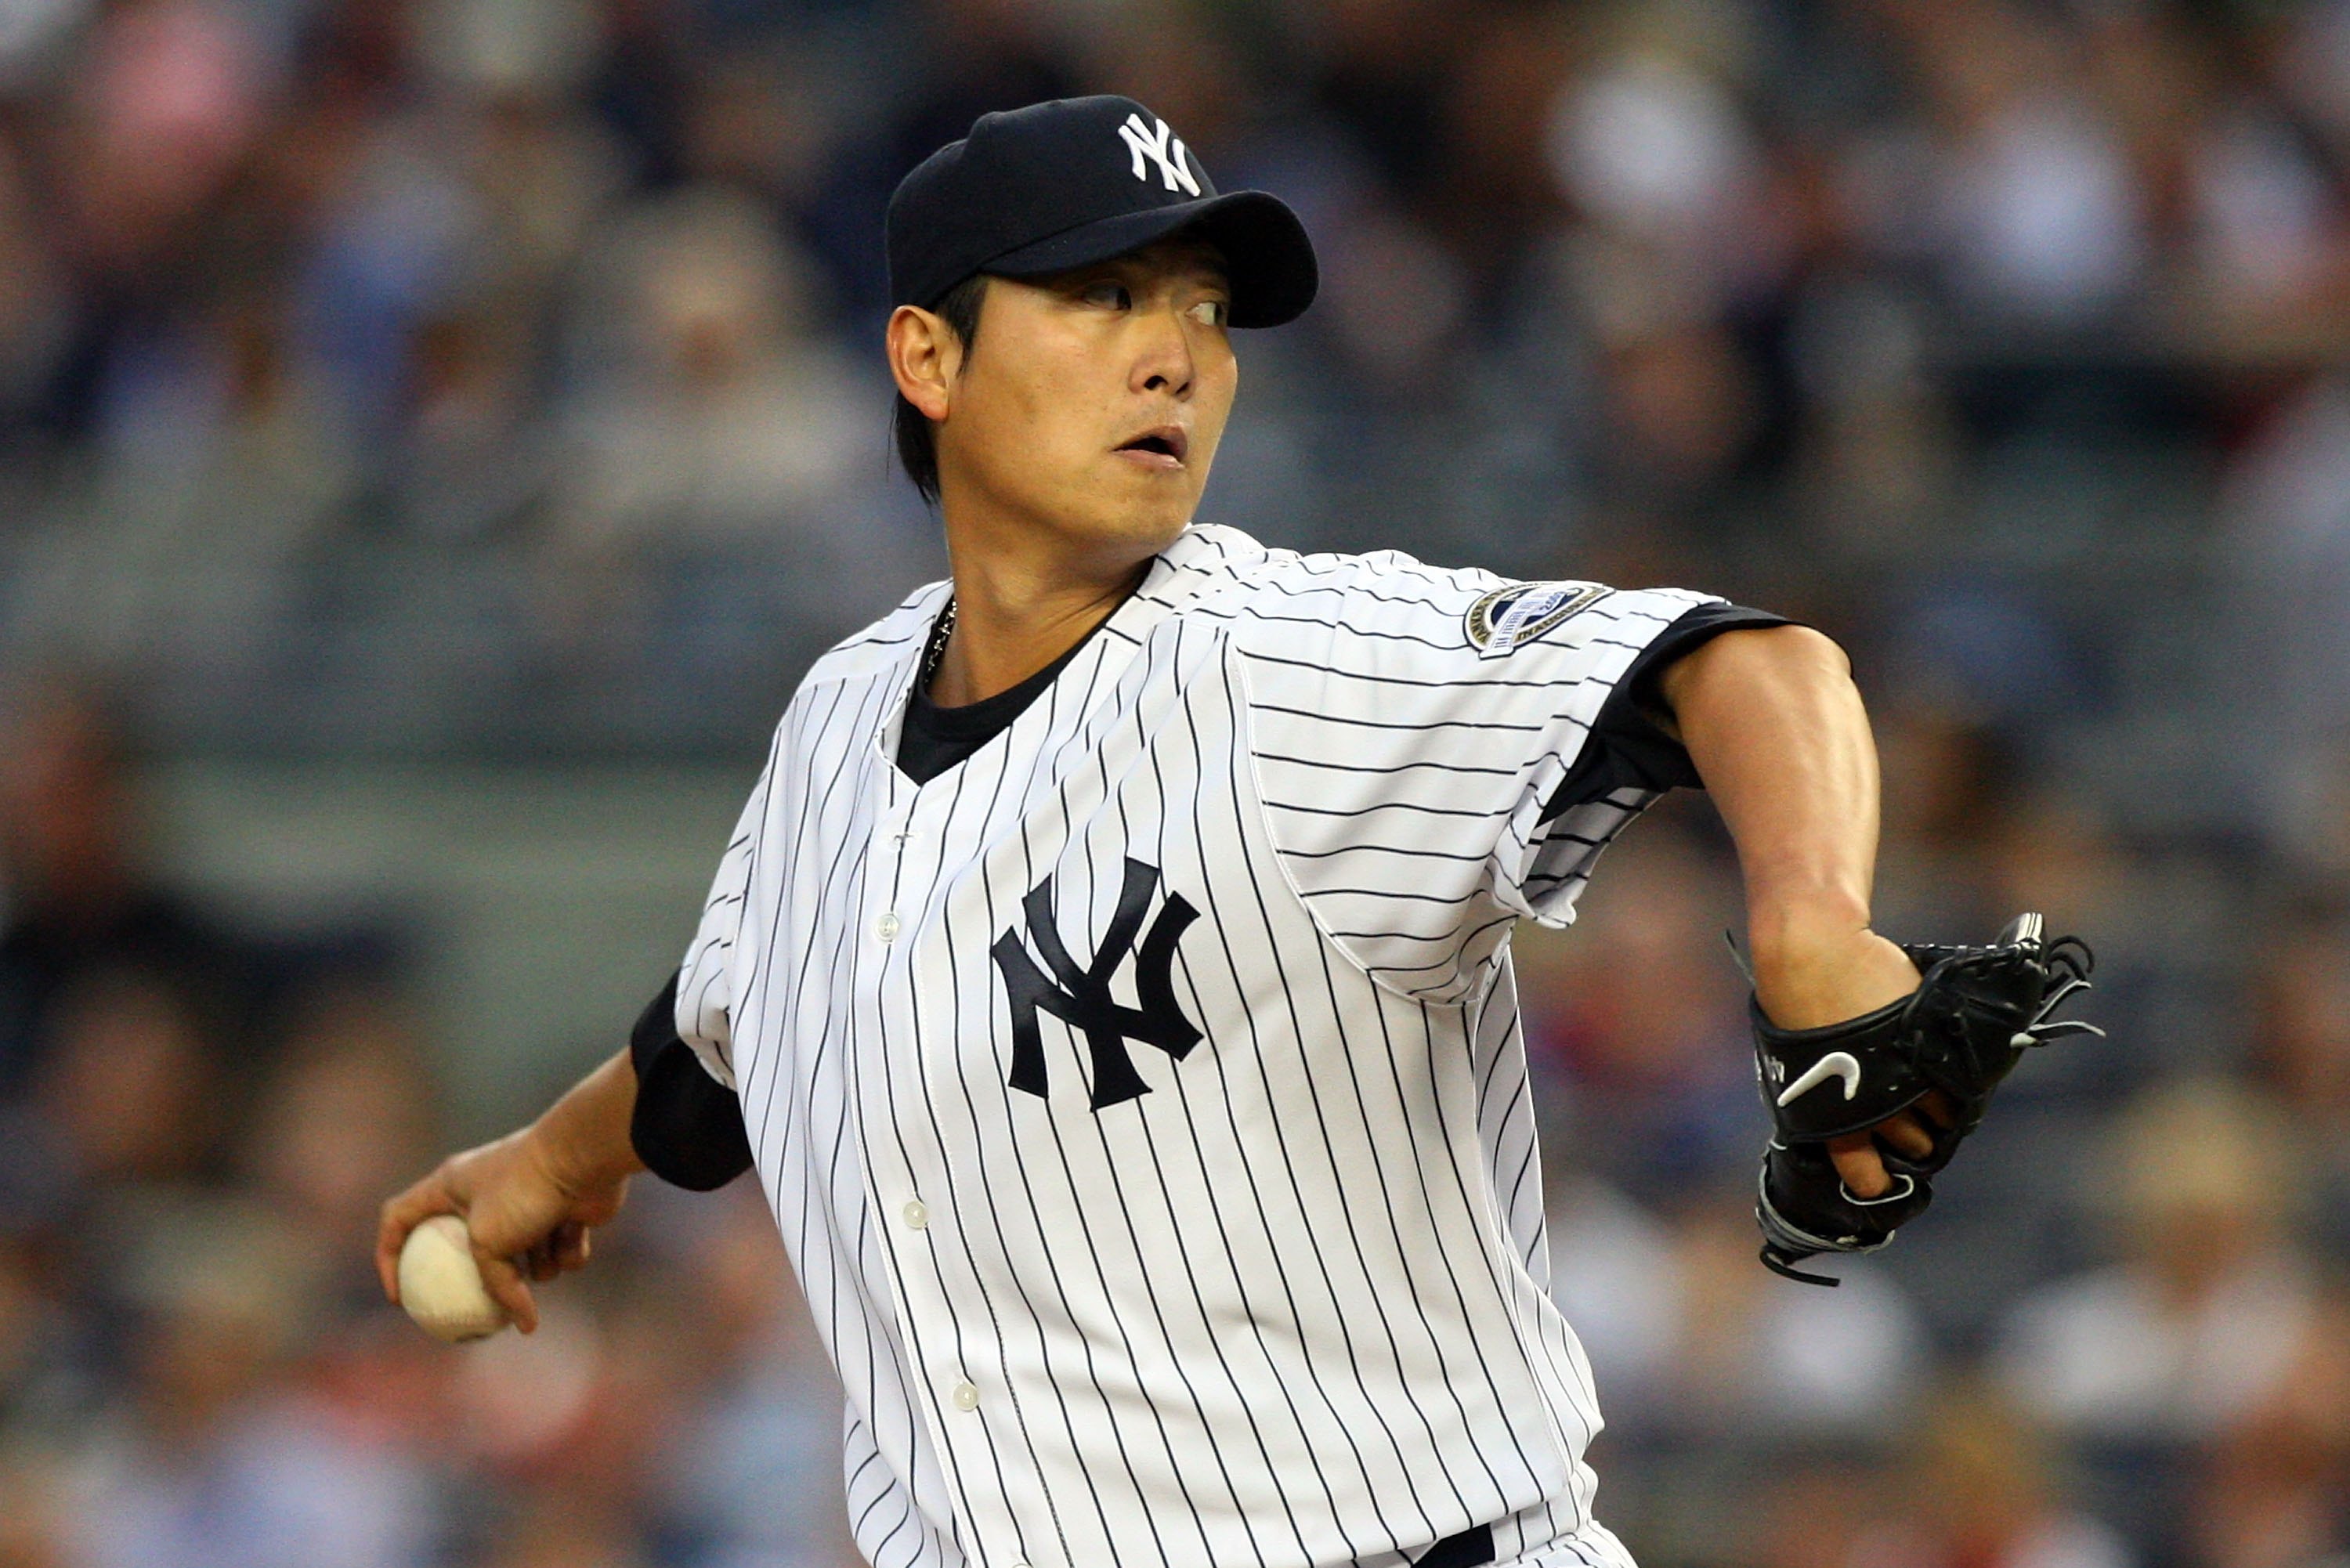 New York Yankees: Bombers 'Keeping Tabs' on Former Ace Chien-Ming